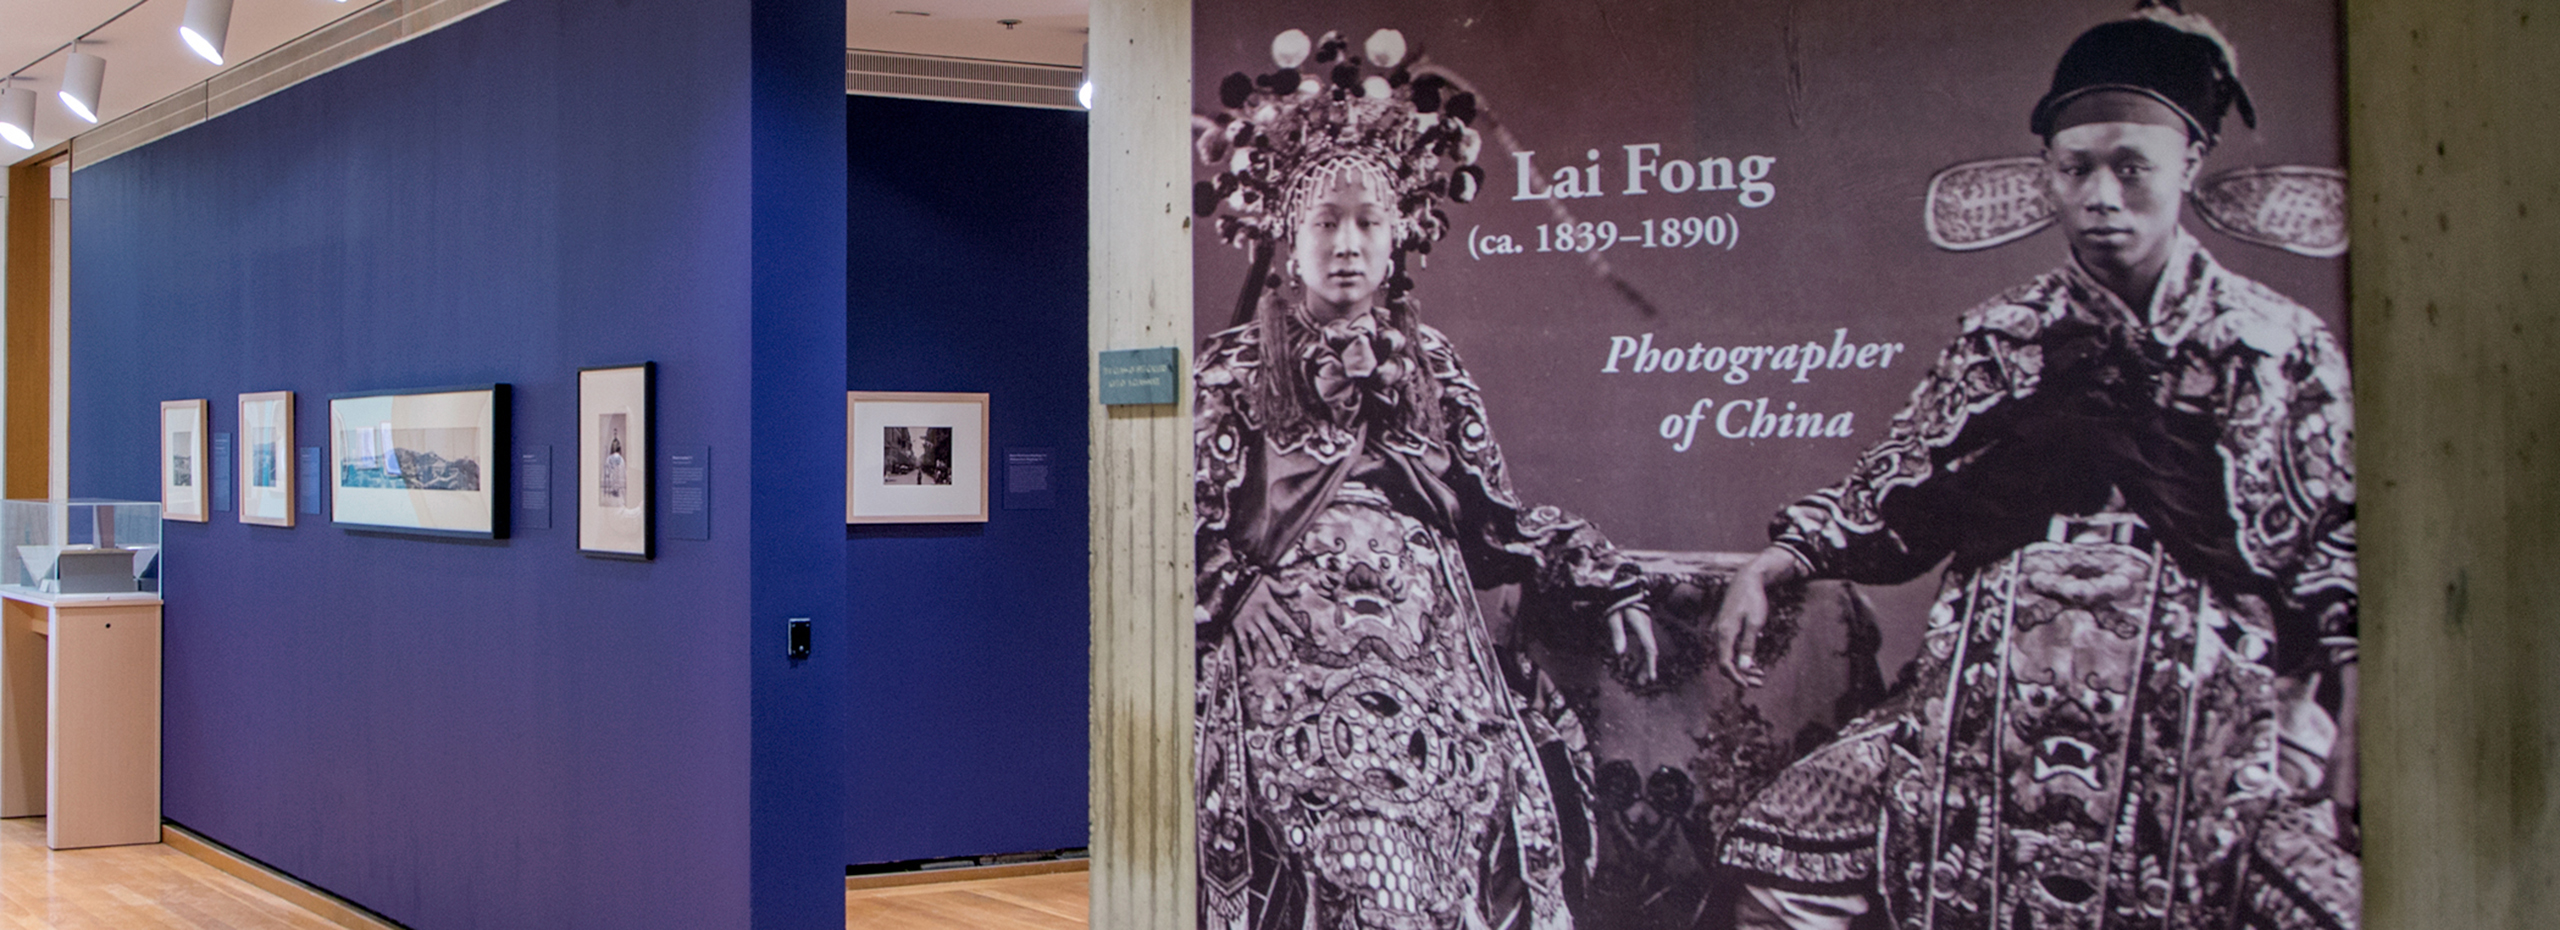 A photography exhibition gallery with purple painted walls and a large photo display of a Chinese man and woman in formal dress